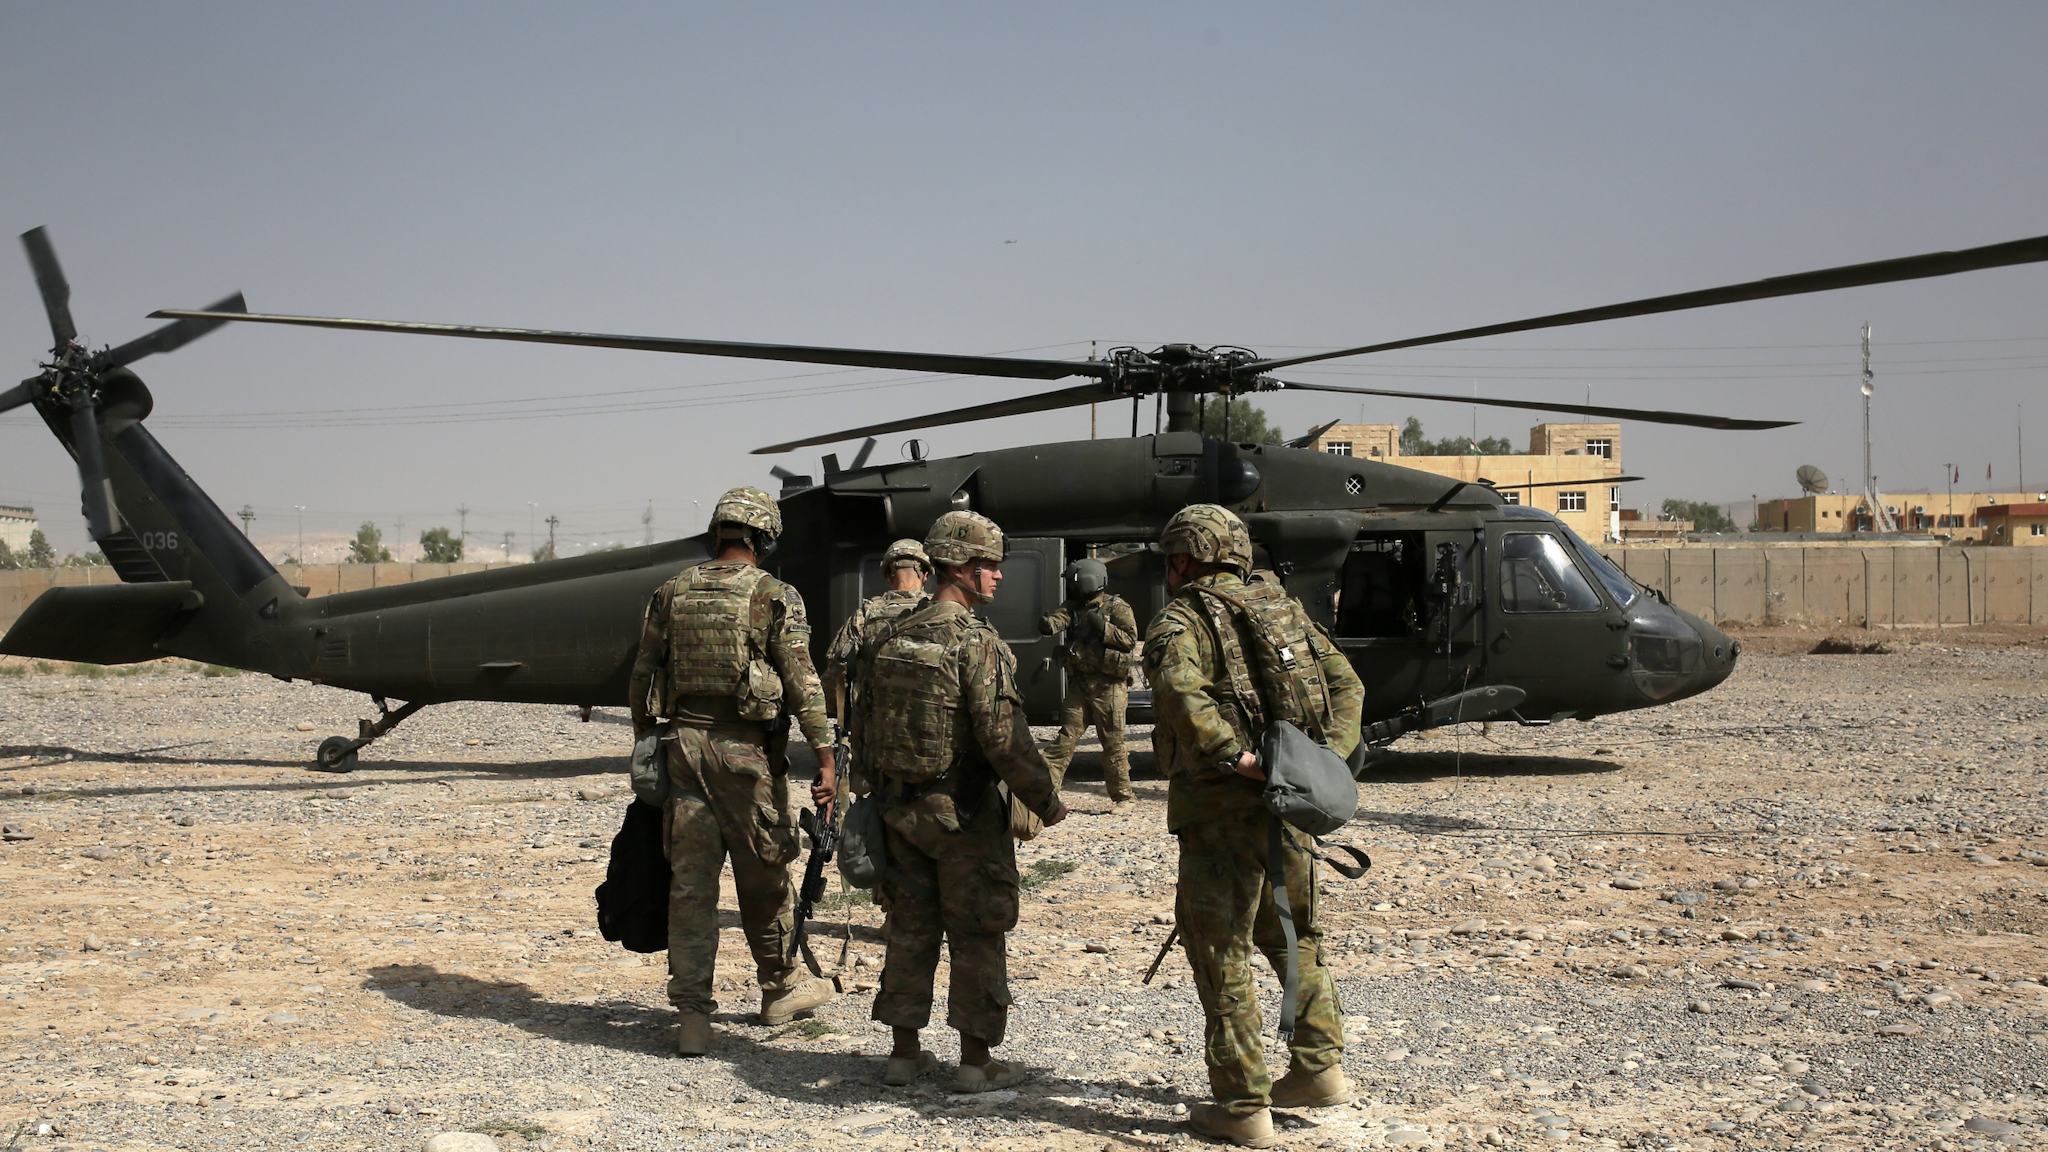 NINEVEH, IRAQ - OCTOBER 19: US soldiers leave Nineveh Joint Operations Command Headquarters with helicopters to go to Al-Kayyara district and around Mosul, in Nineveh, Iraq on October 19, 2016.